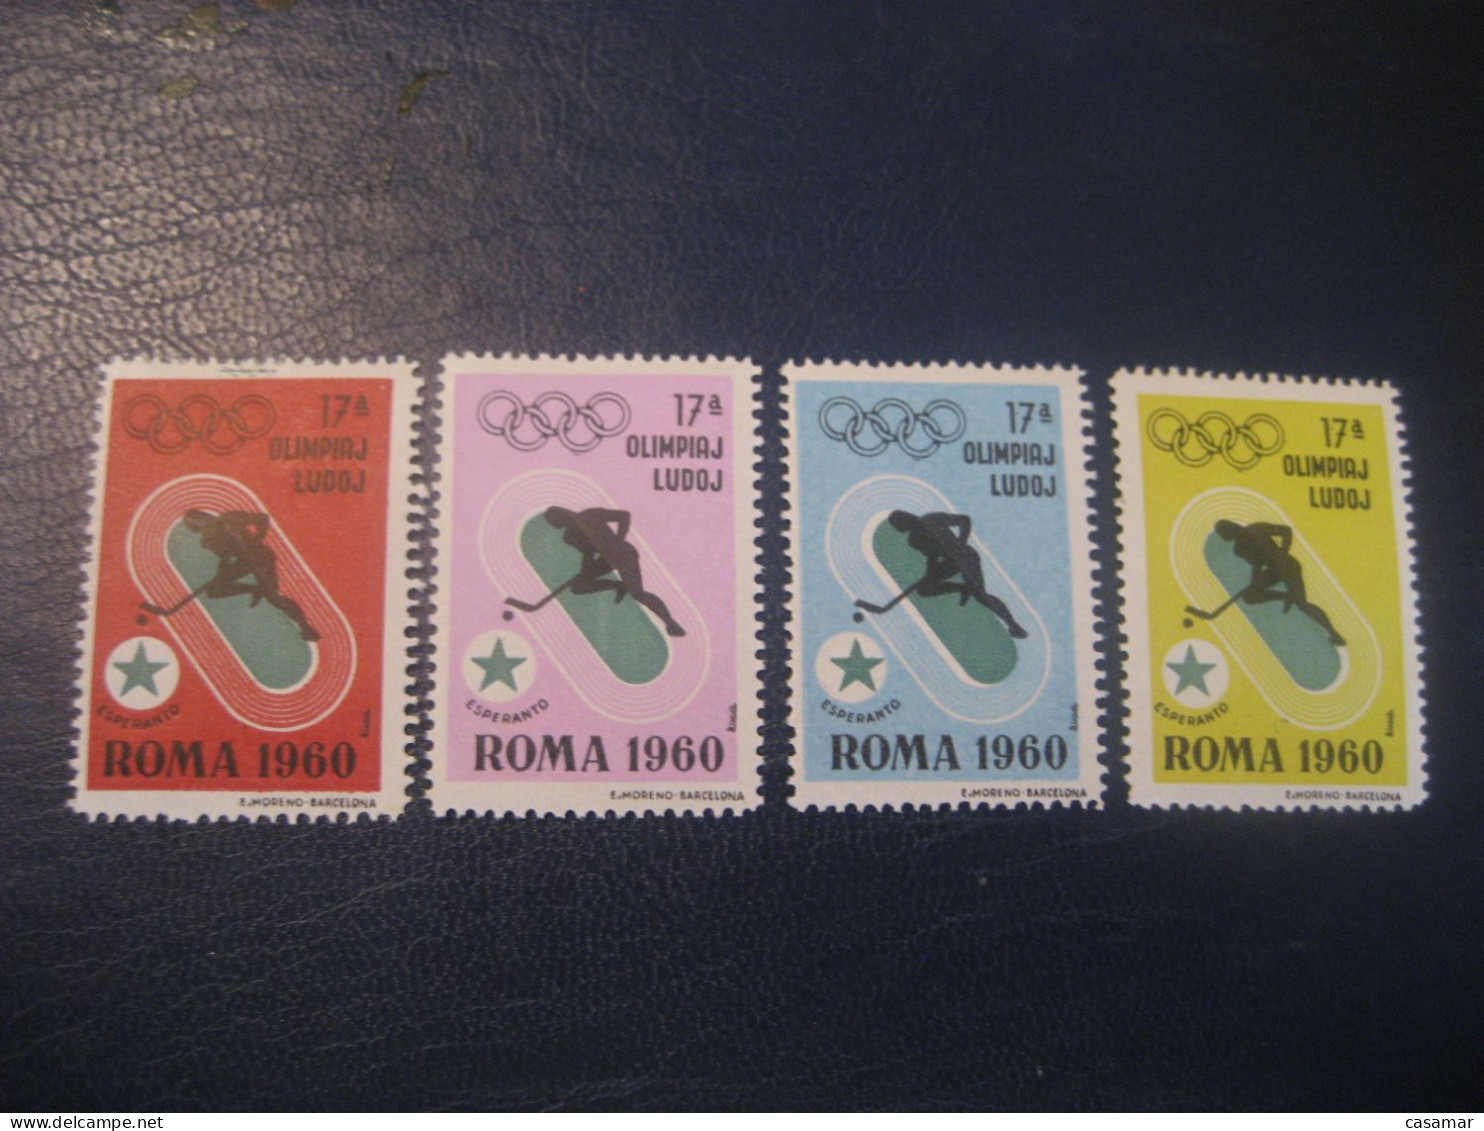 ROMA 1960 Ice Hockey Sur Glace Olympic Games Olympics Esperanto 4 Poster Stamp Vignette ITALY Spain Label - Eishockey